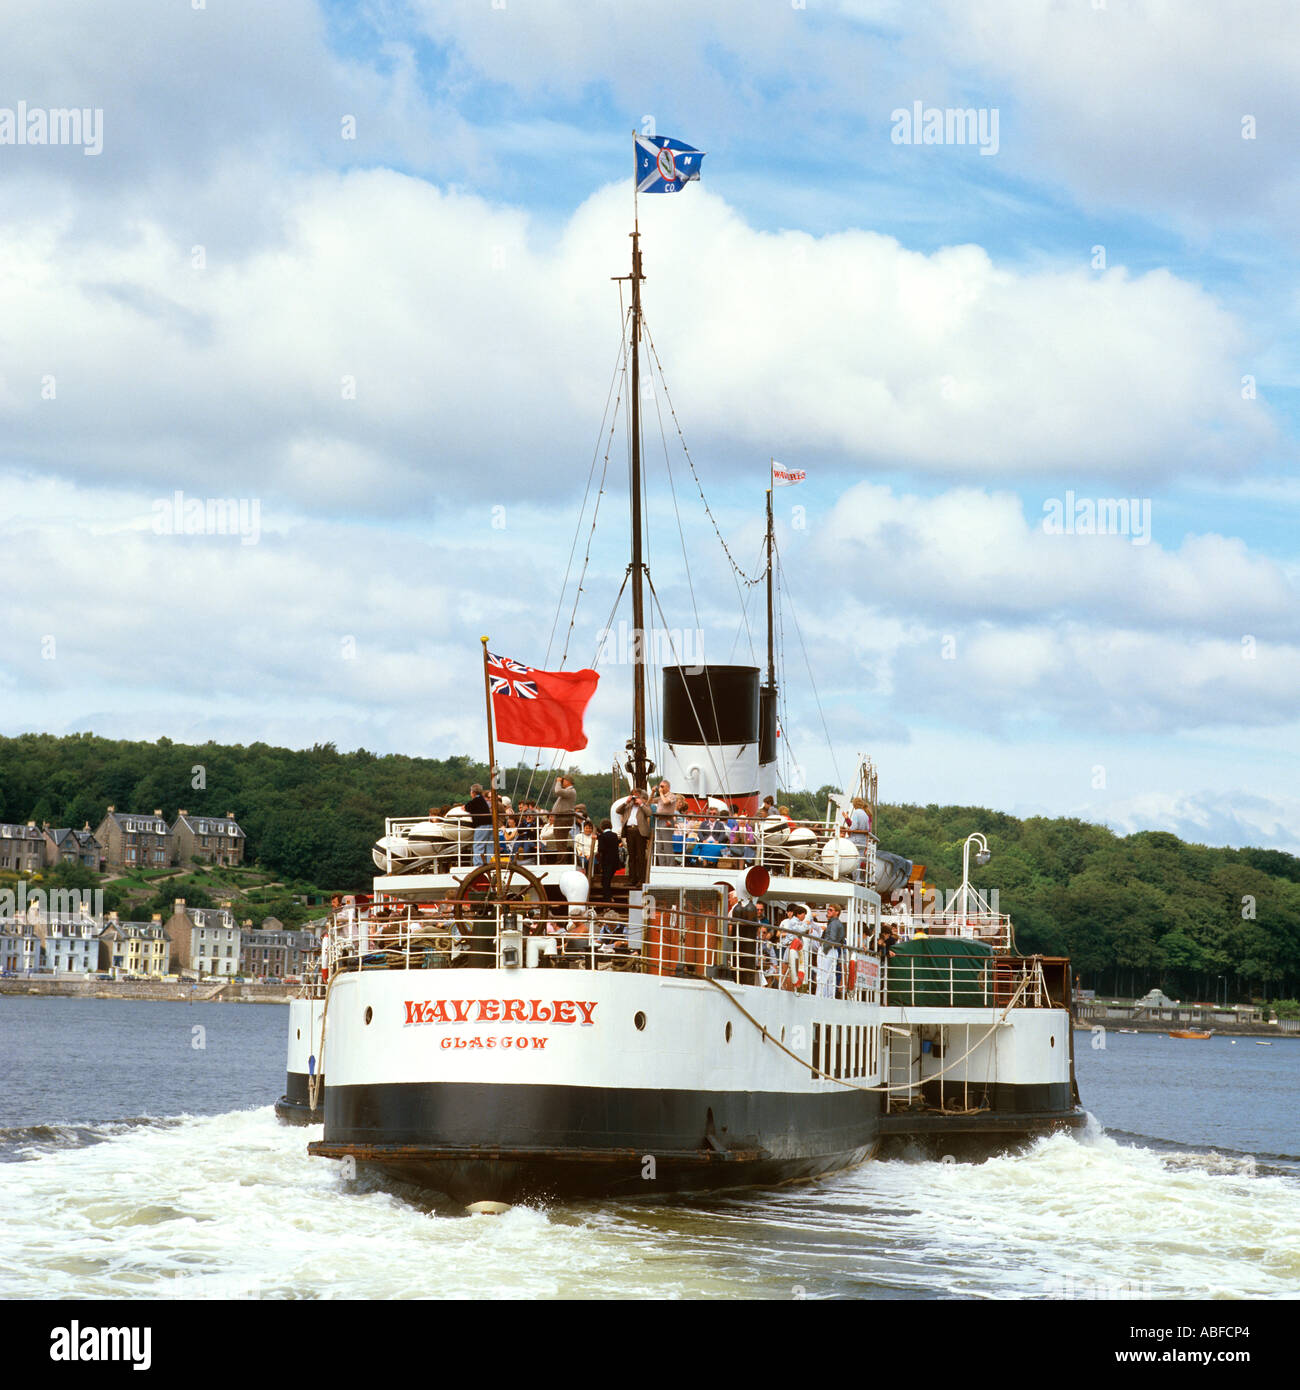 Scozia Isle of Bute Rothesay Clyde steamship SS Waverley Foto Stock